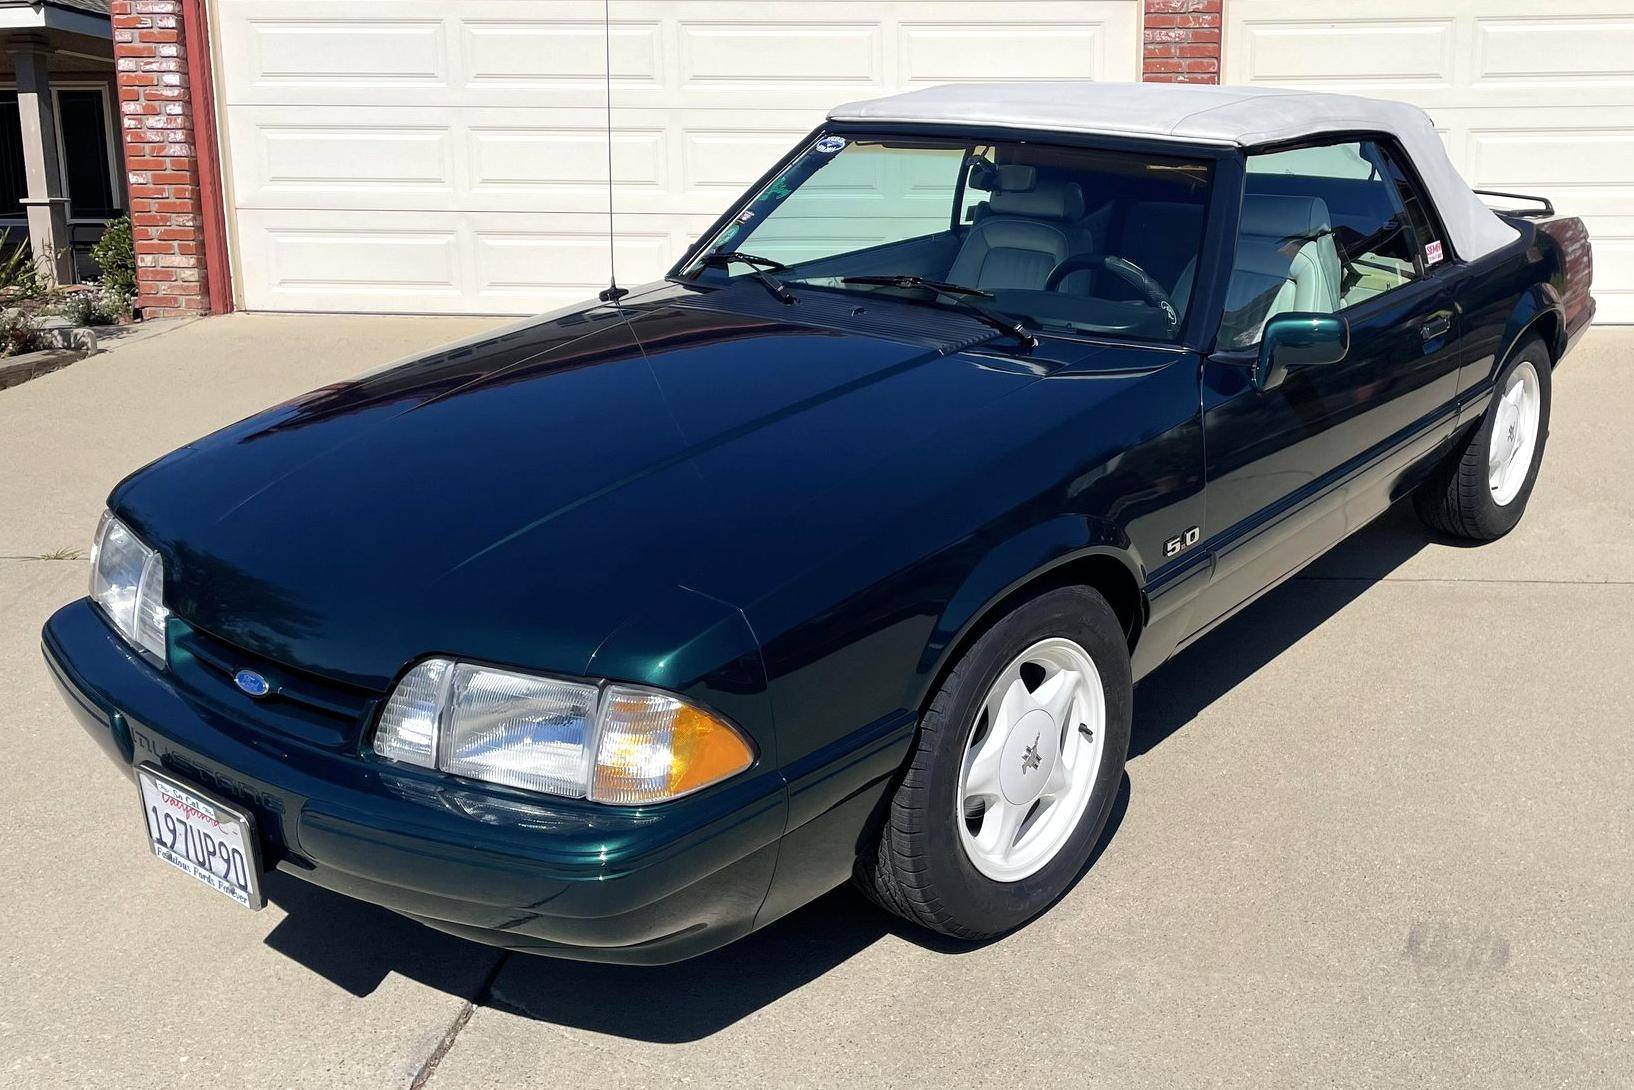 Special edition Ford Mustangs: 7 of the rarest models